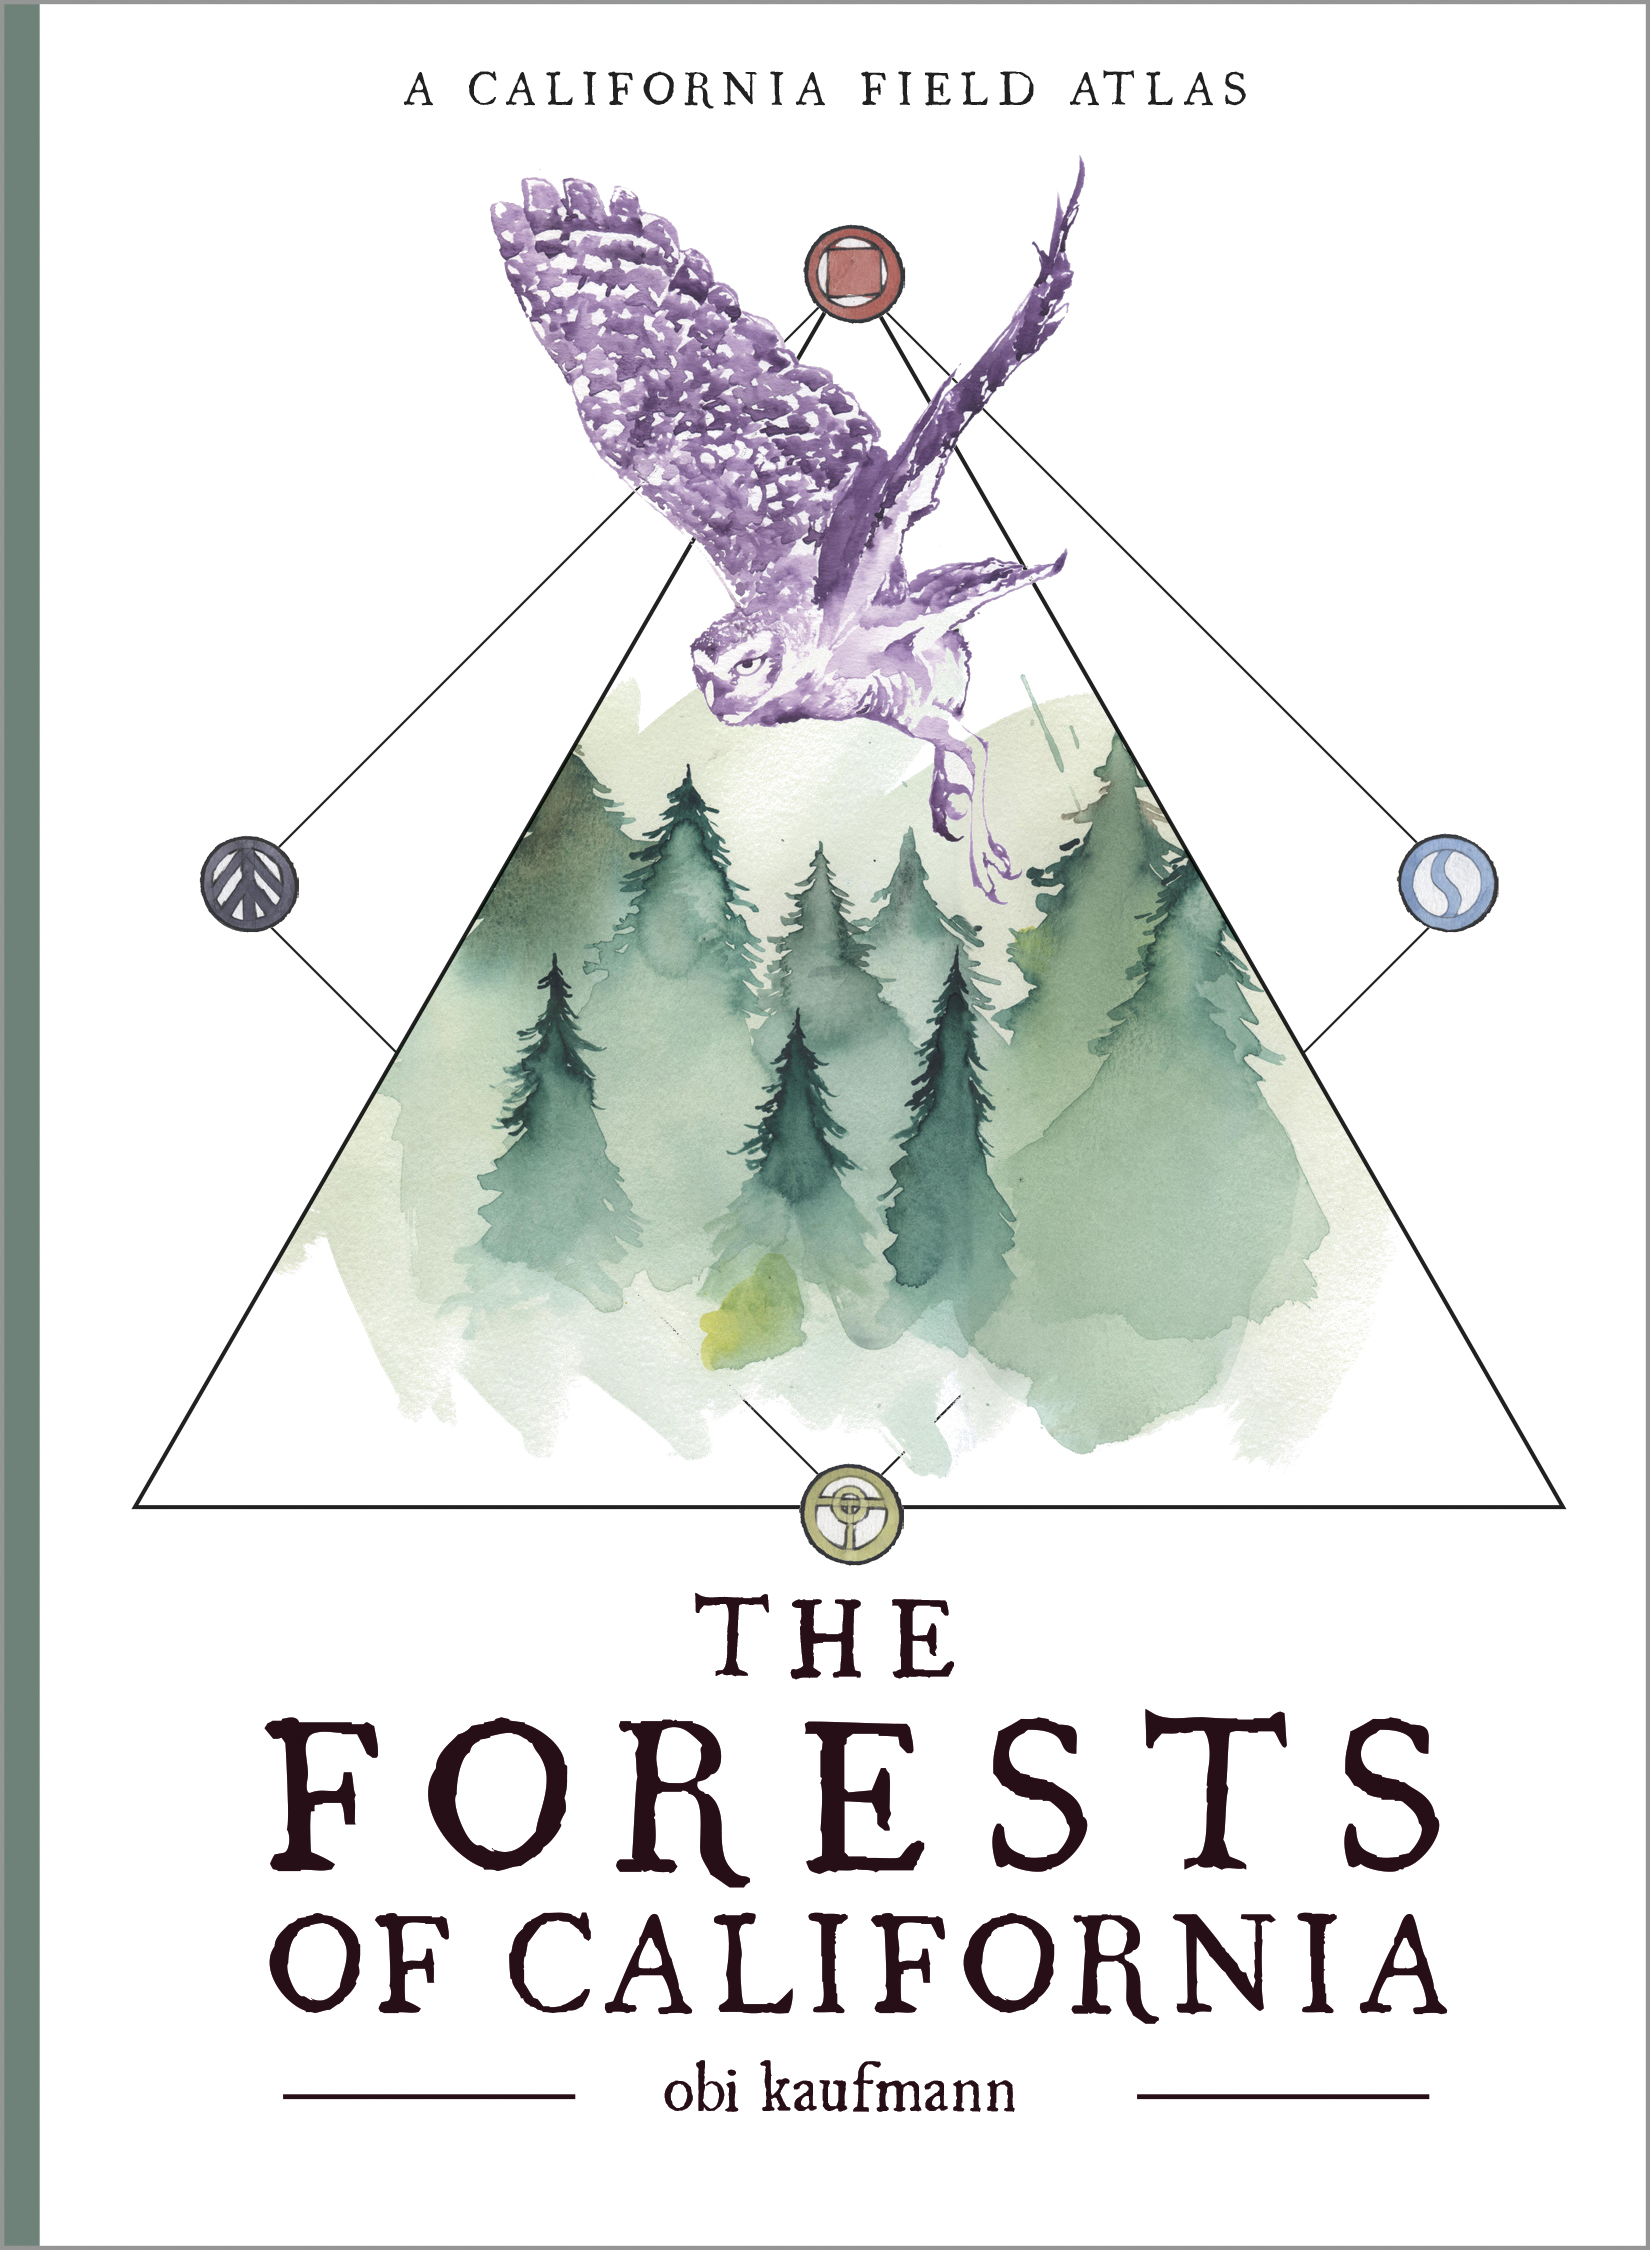 The Forests of California: A California Field Atlas